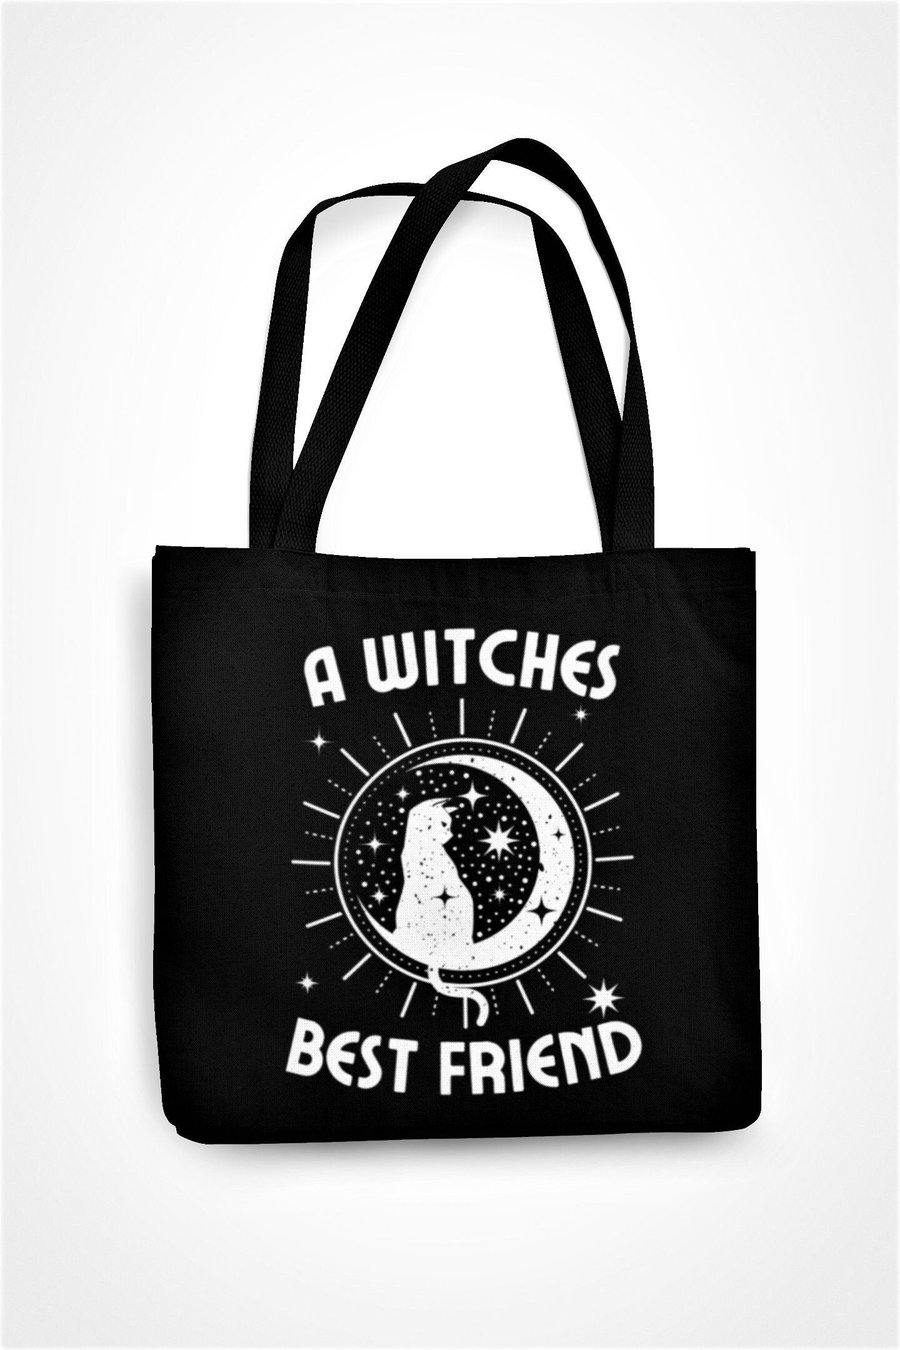 A Witches Best Friend Tote Bag Gothic Halloween Witches Black Cat Magic Eco 